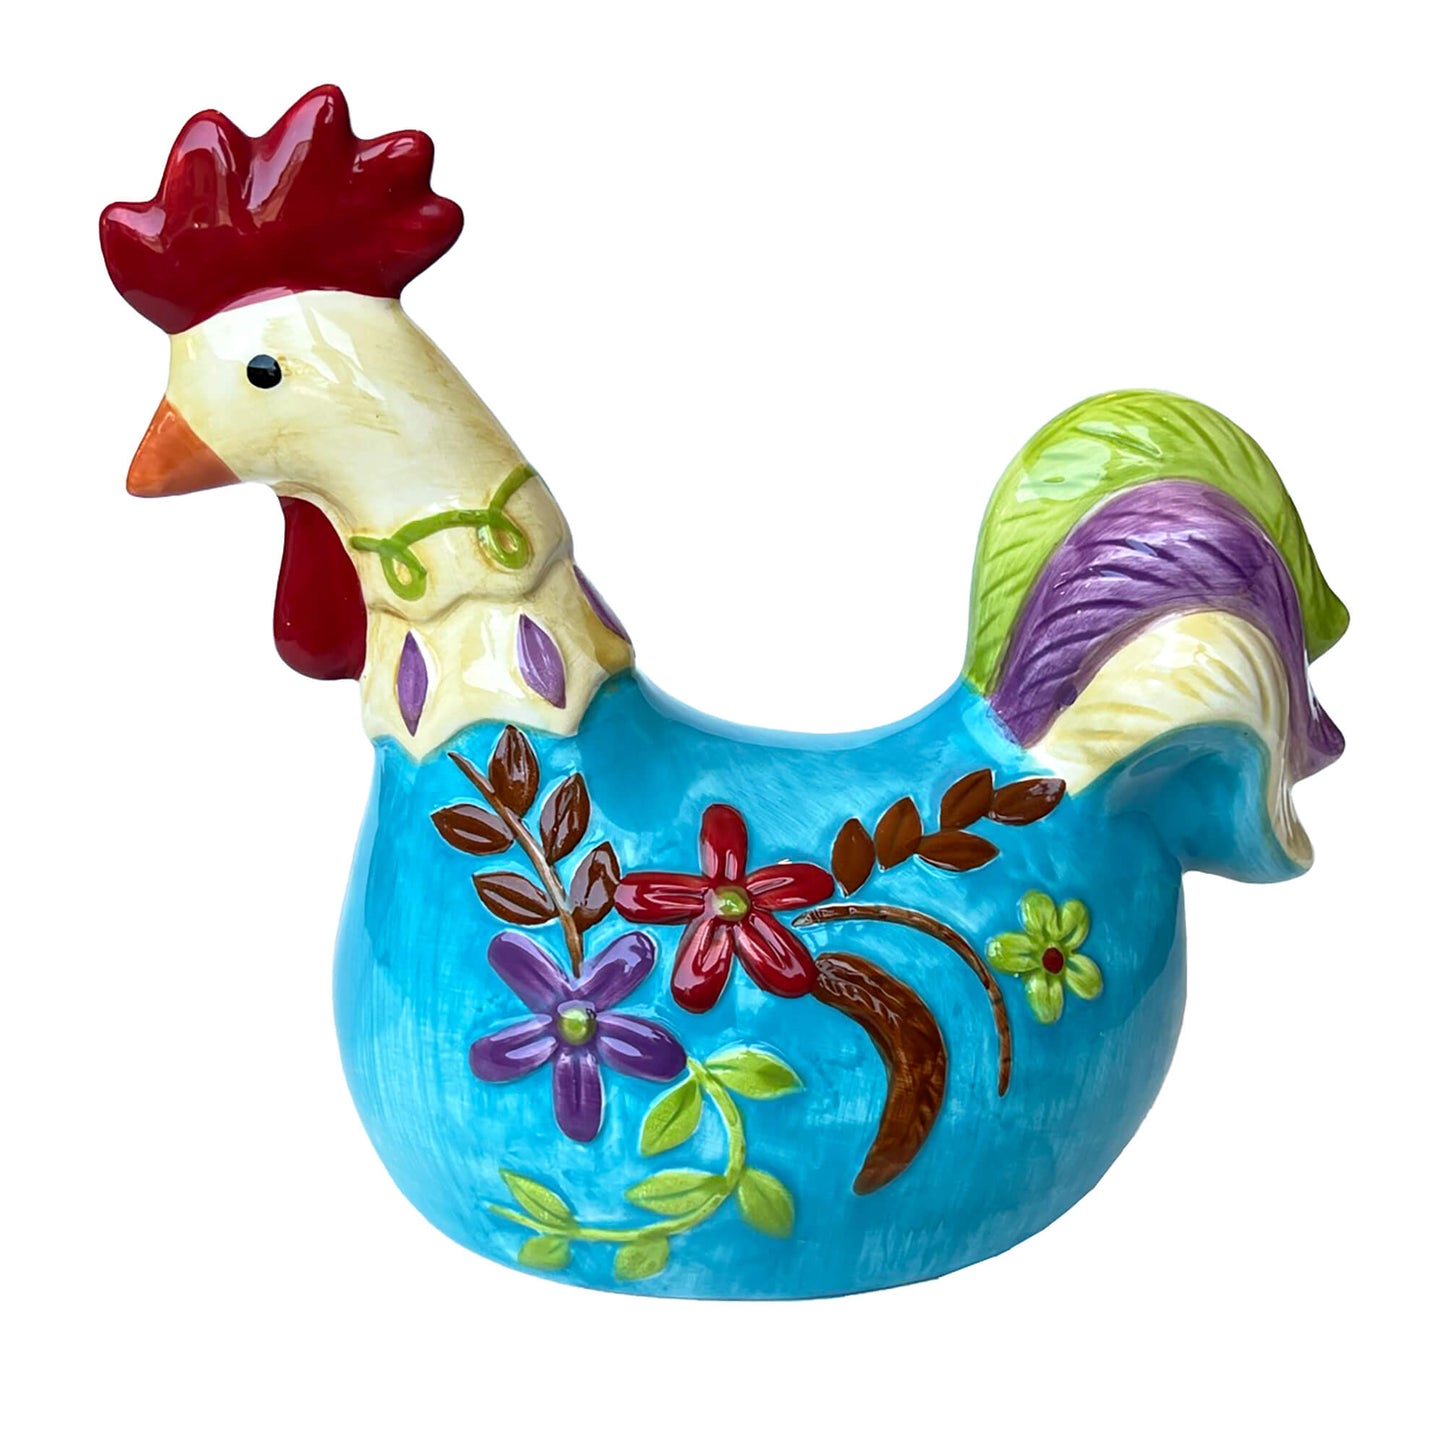 Apropos-Home-Collection-Blue-Ceramic-Chicken-Turkey-Rooster-side-view